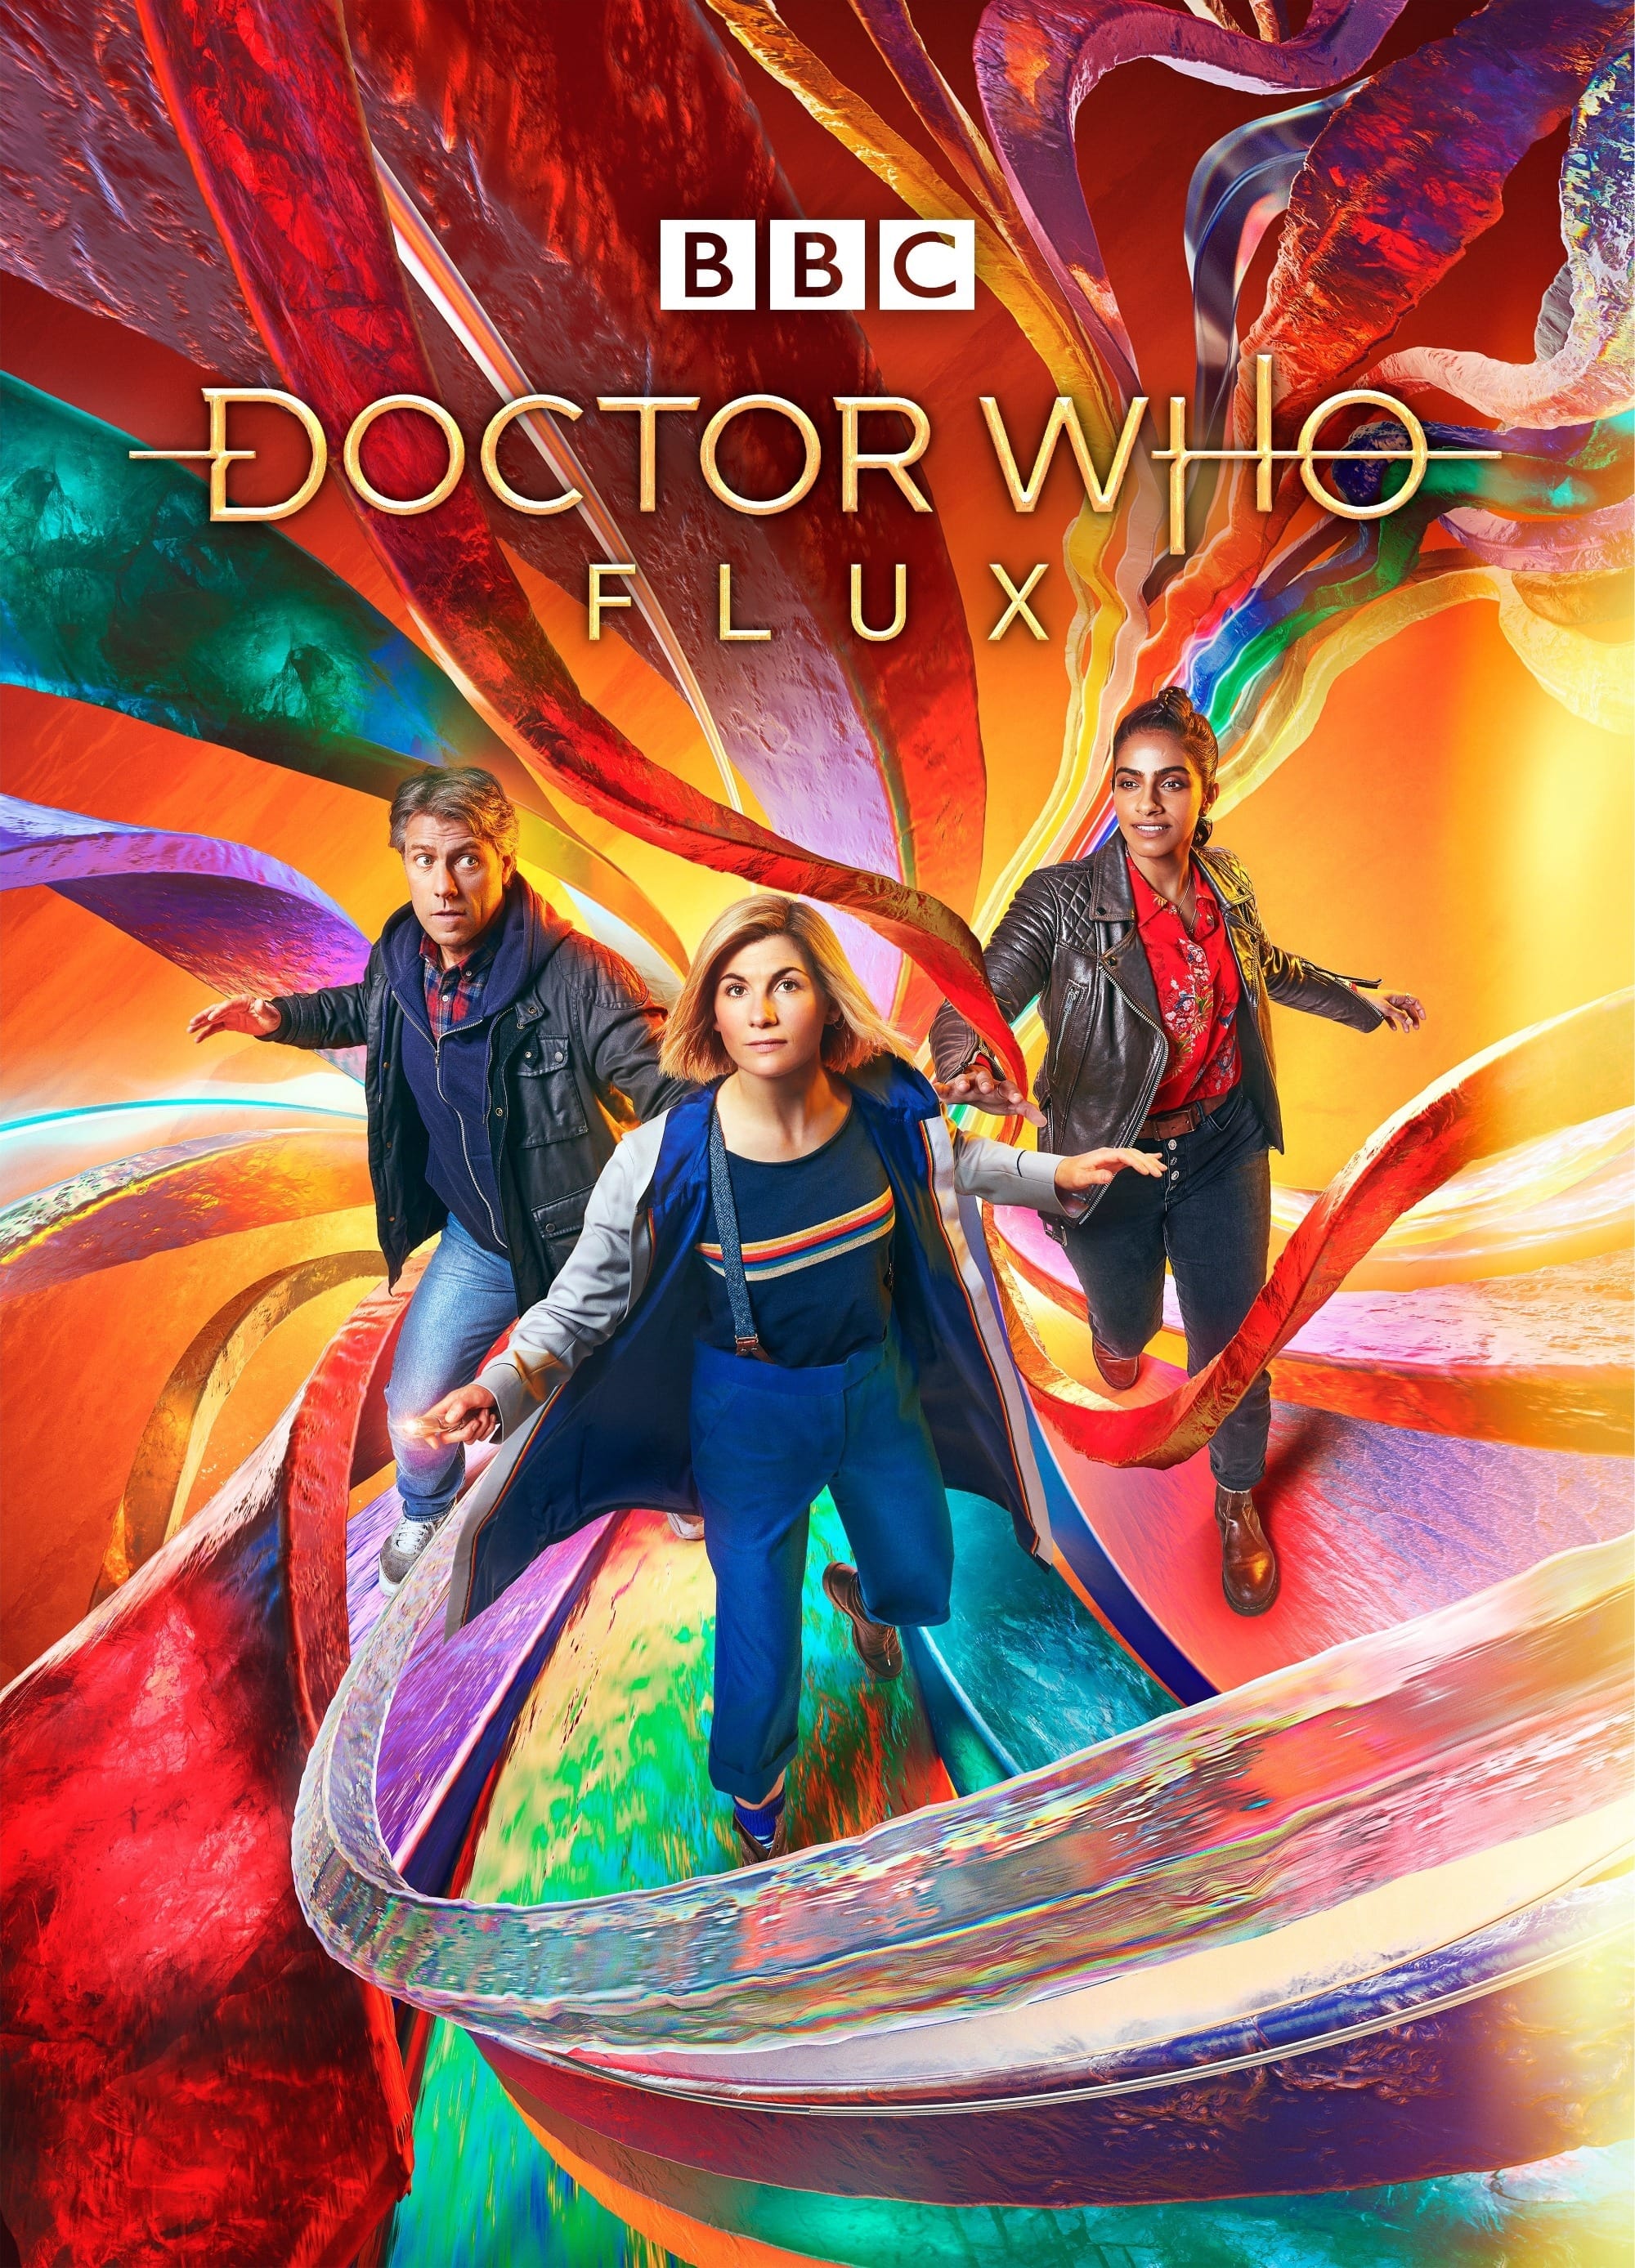 Doctor Who: Flux TV Shows About Doctor